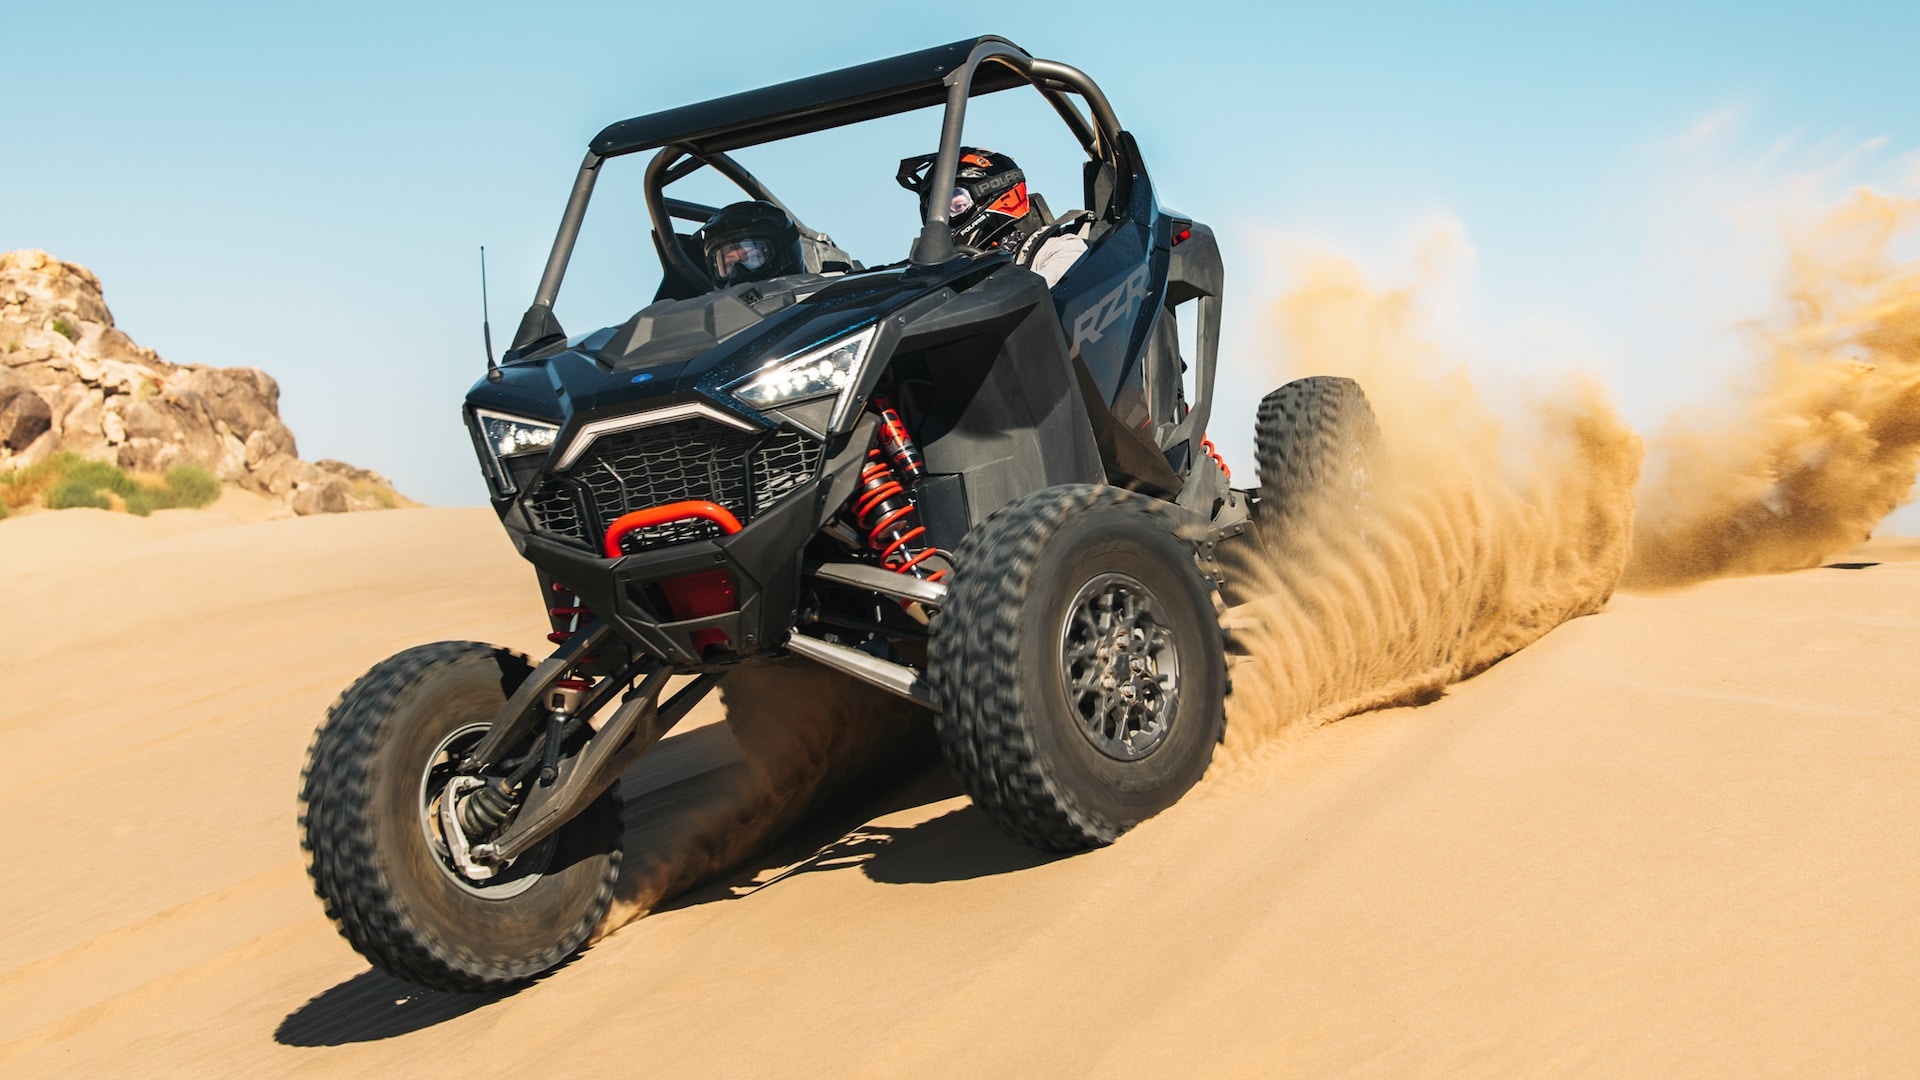 Polaris RZR, Powerful off-road side by side, Ready for adventure, Rocking performance, 1920x1080 Full HD Desktop